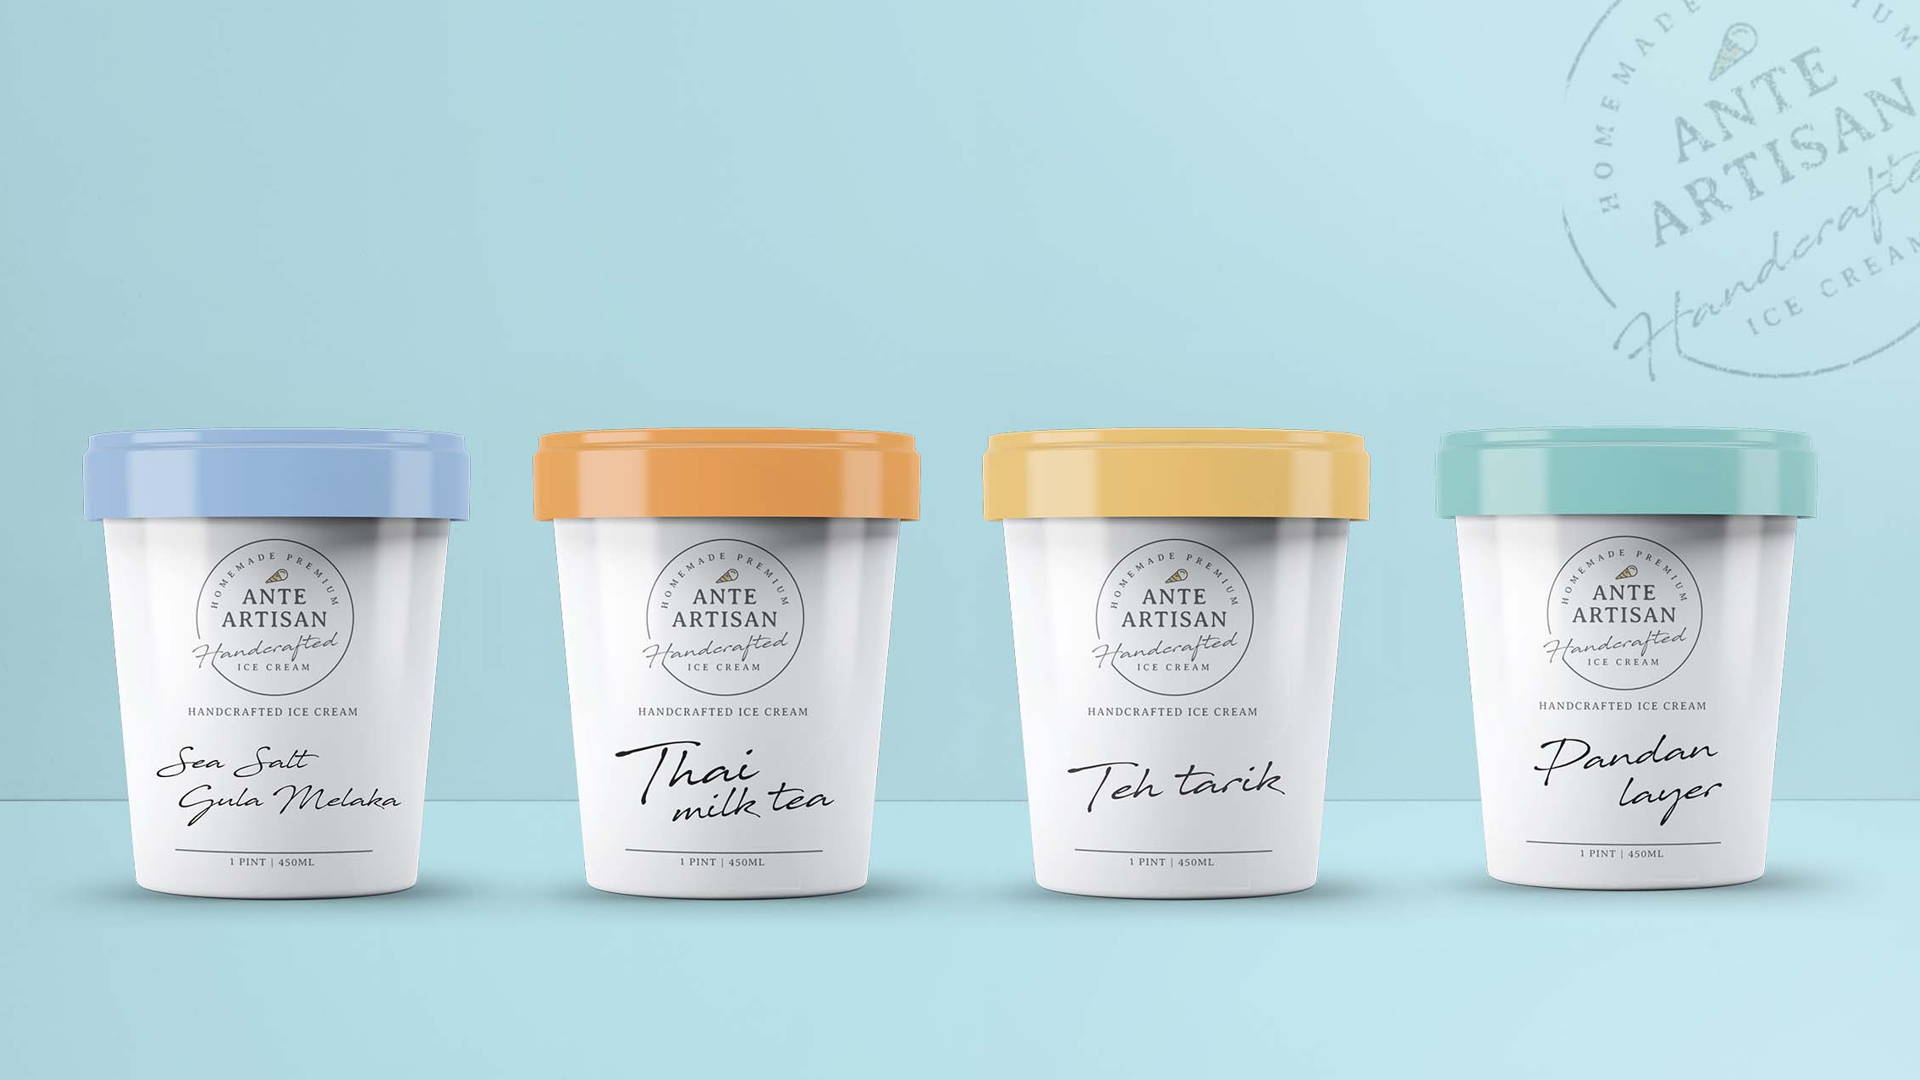 Featured image for "Less is More" With This Ice Cream Packaging Design